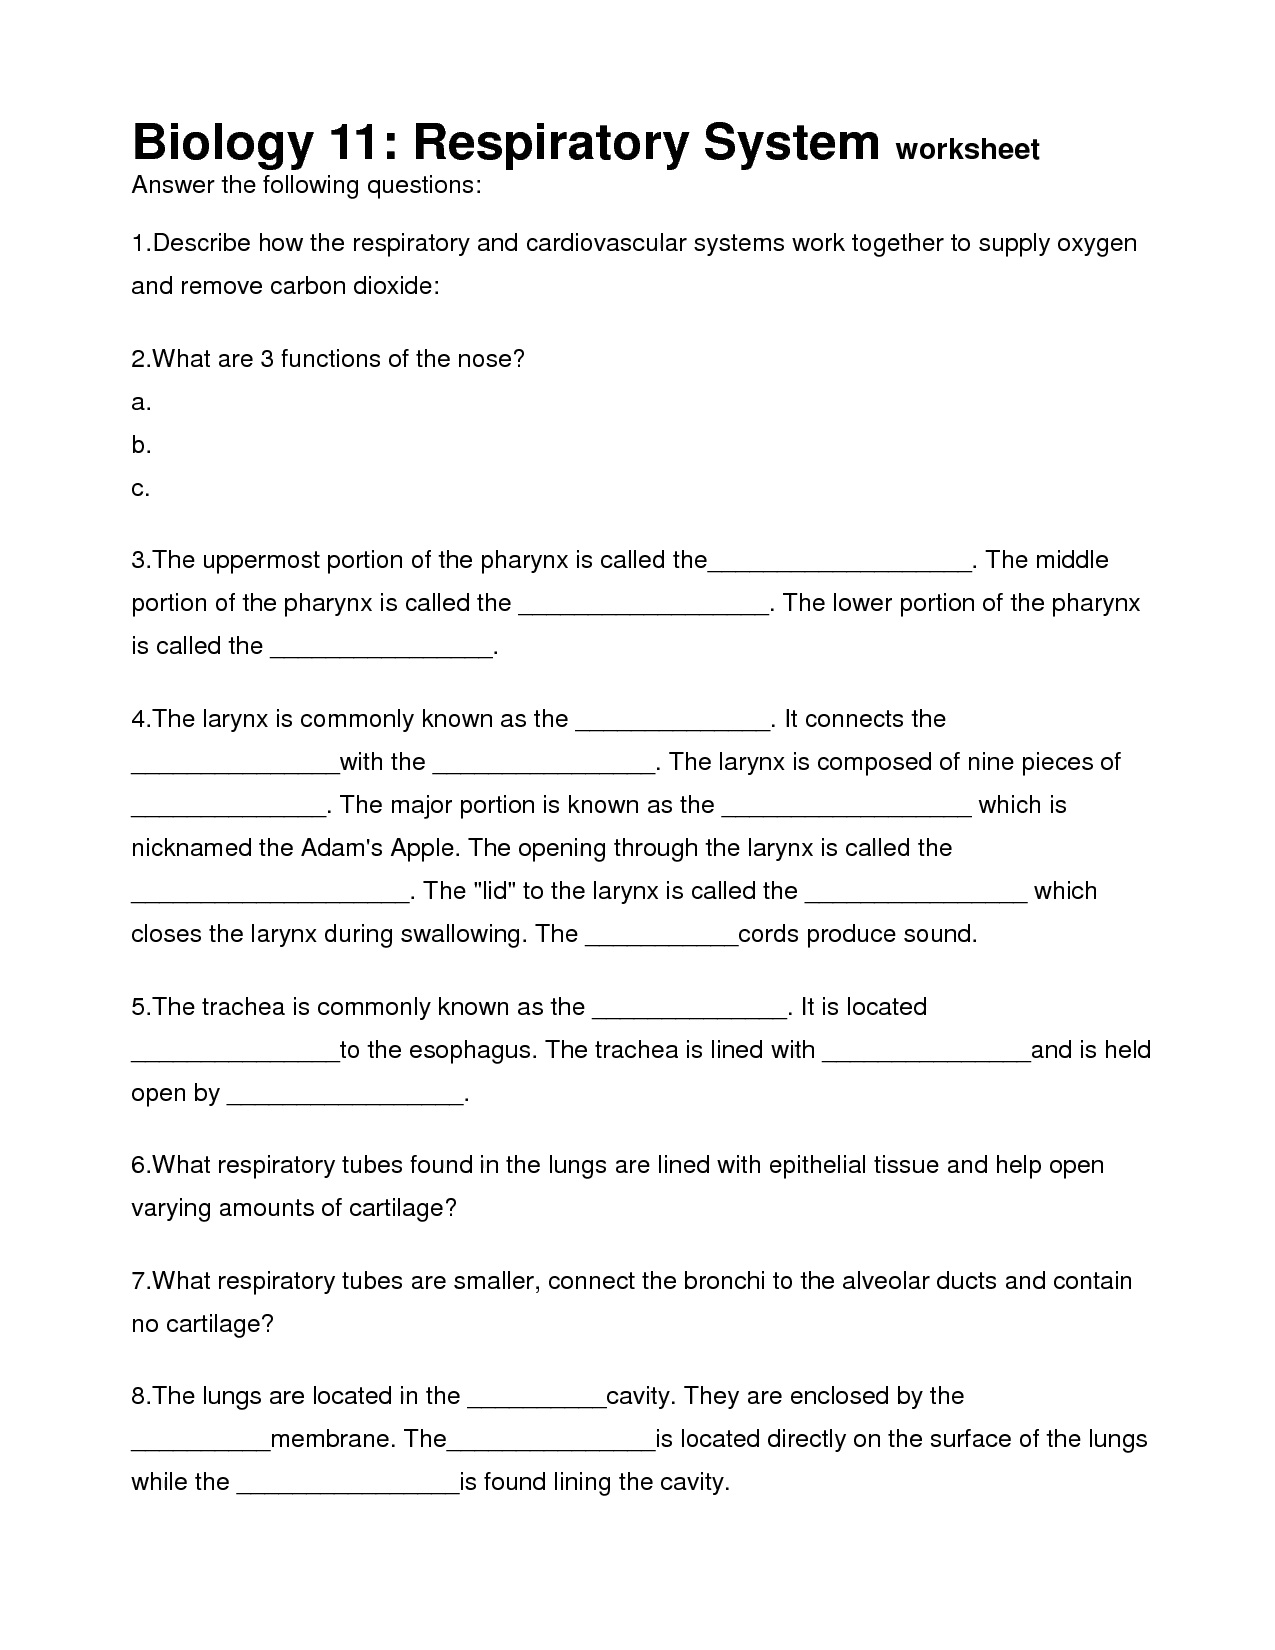 Week 11 Photosynthesis and Cellular Respiration Biome Project With Bill Nye Respiration Worksheet